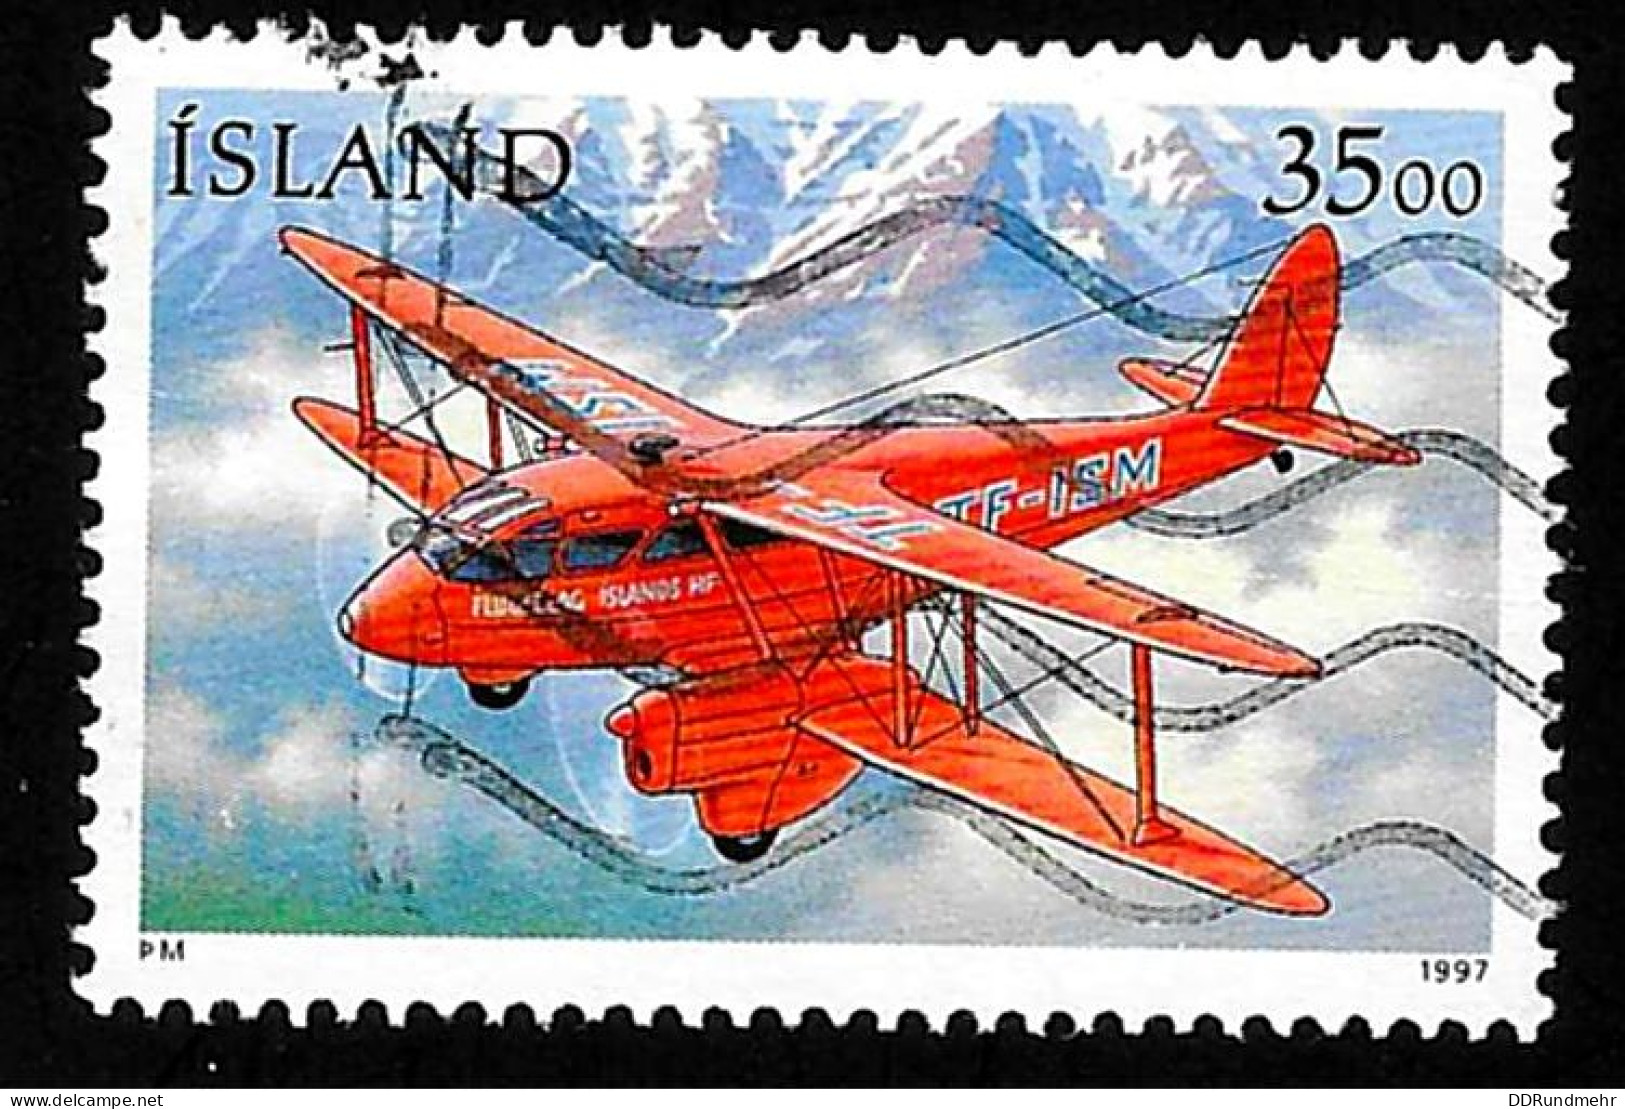 1997 Postal Aircrafts  Michel IS 866 Stamp Number IS 838 Stanley Gibbons IS 879 Used - Oblitérés